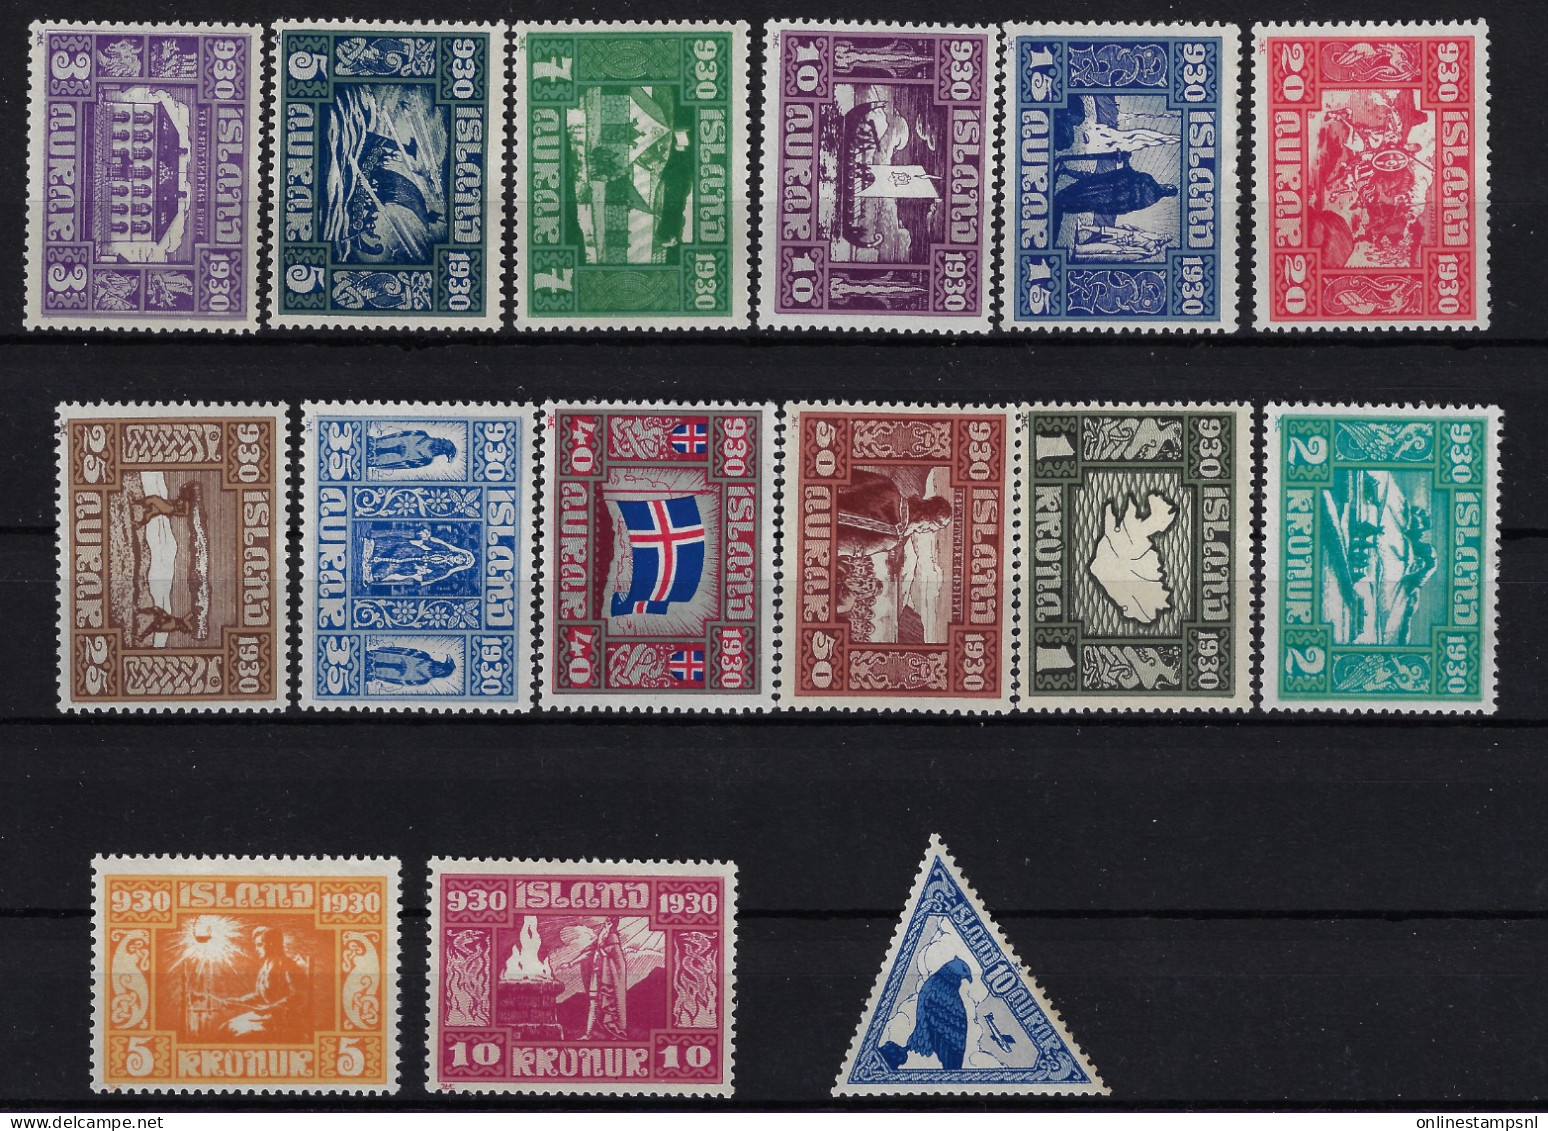 Iceland Mi 125 - 140 1930 Neuf Avec ( Ou Trace De) Charniere / MH/* 137/2 KR Small Thin At Top - Unused Stamps